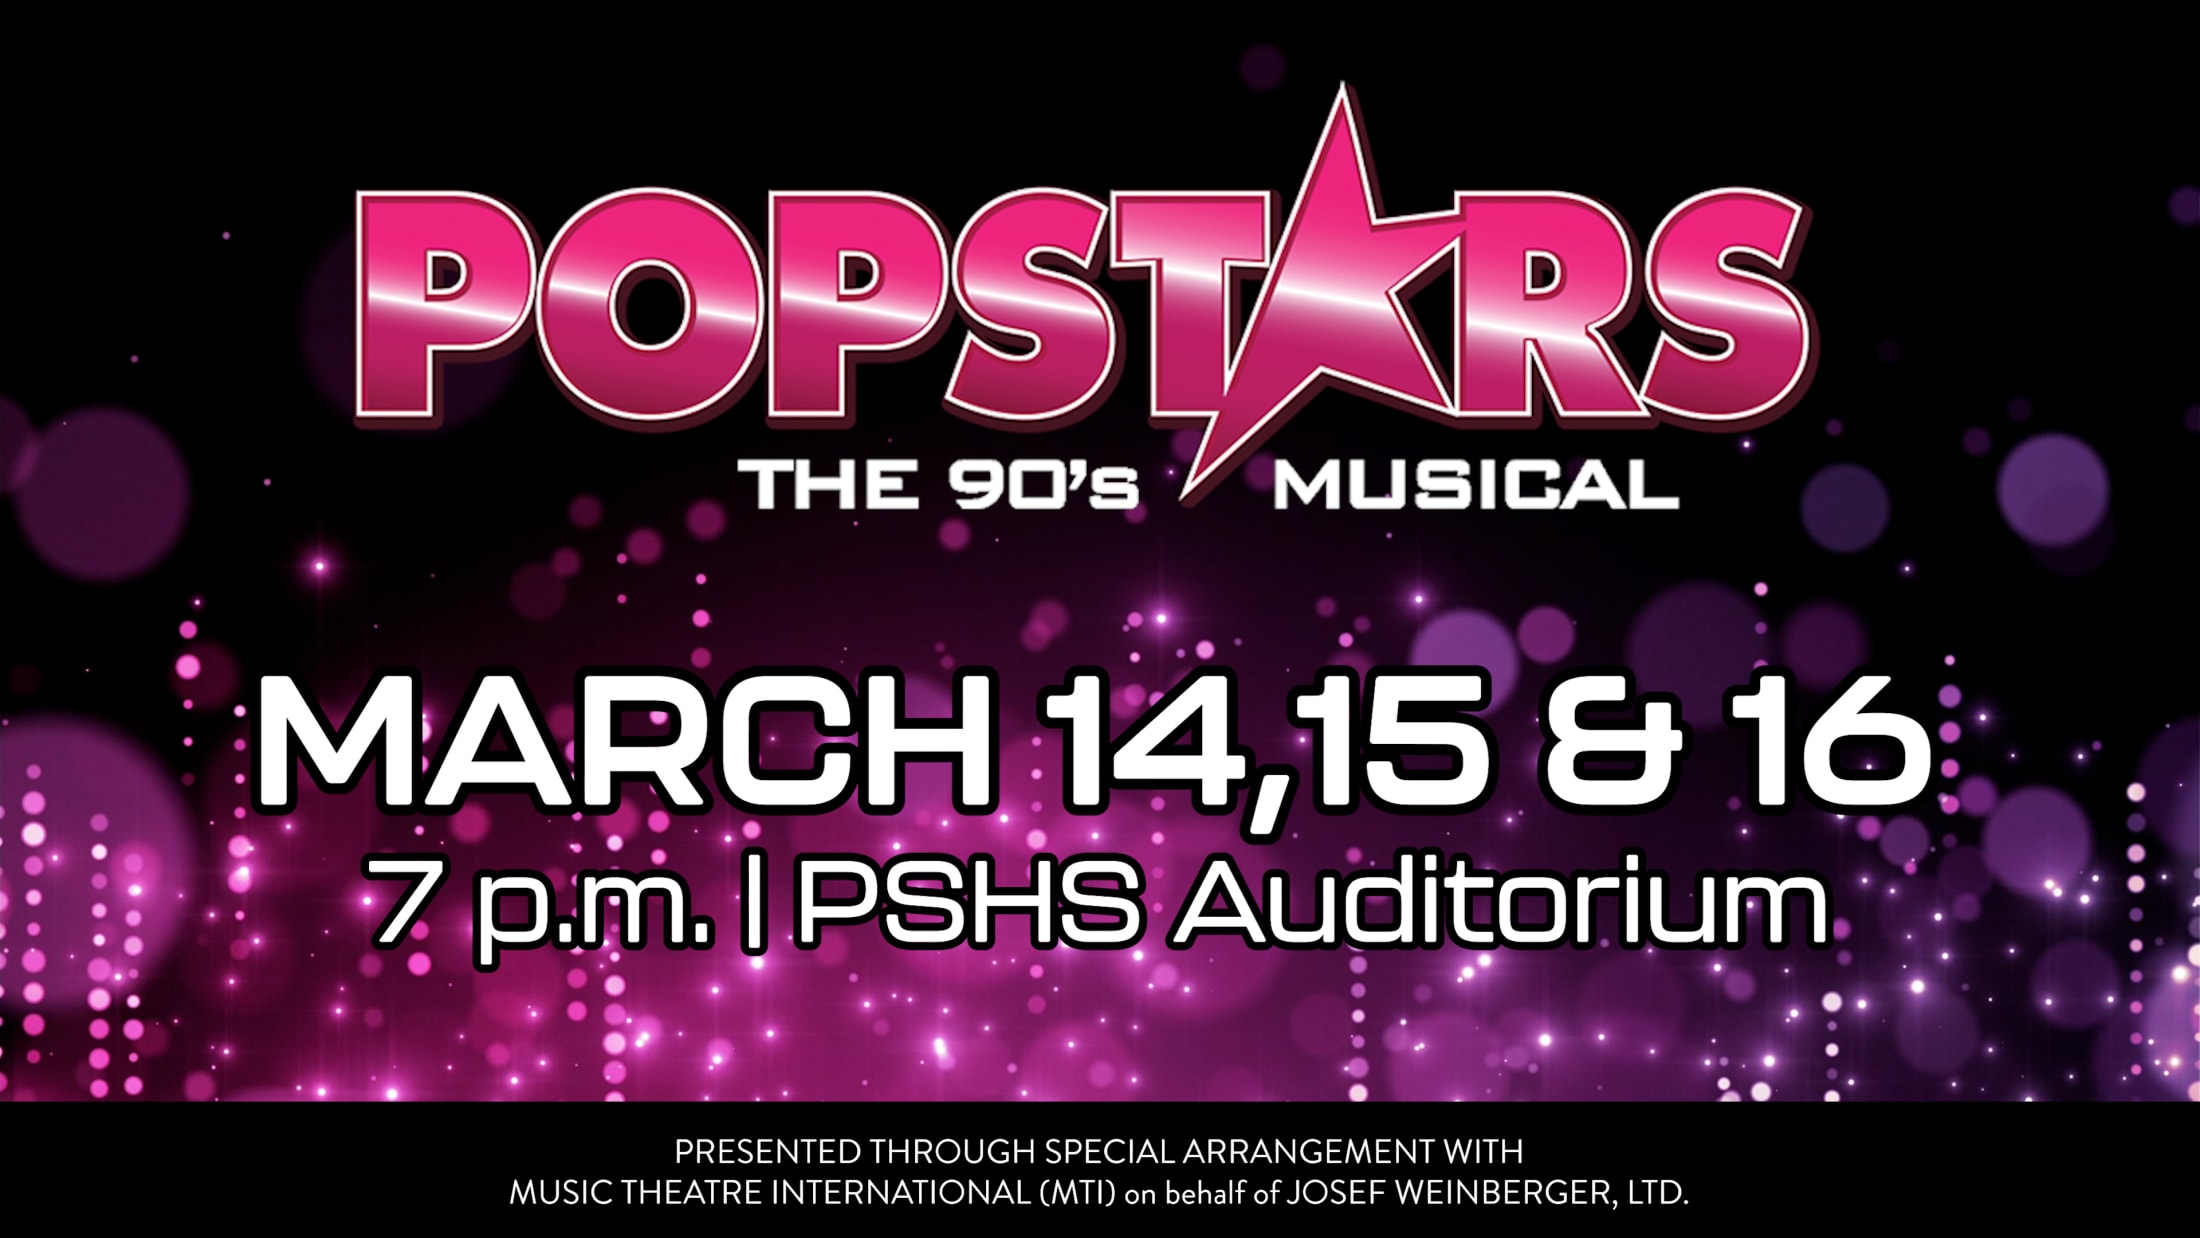 Meet the Cast - The Poland Players present... POPSTARS, The 90s Musical - March 14-16